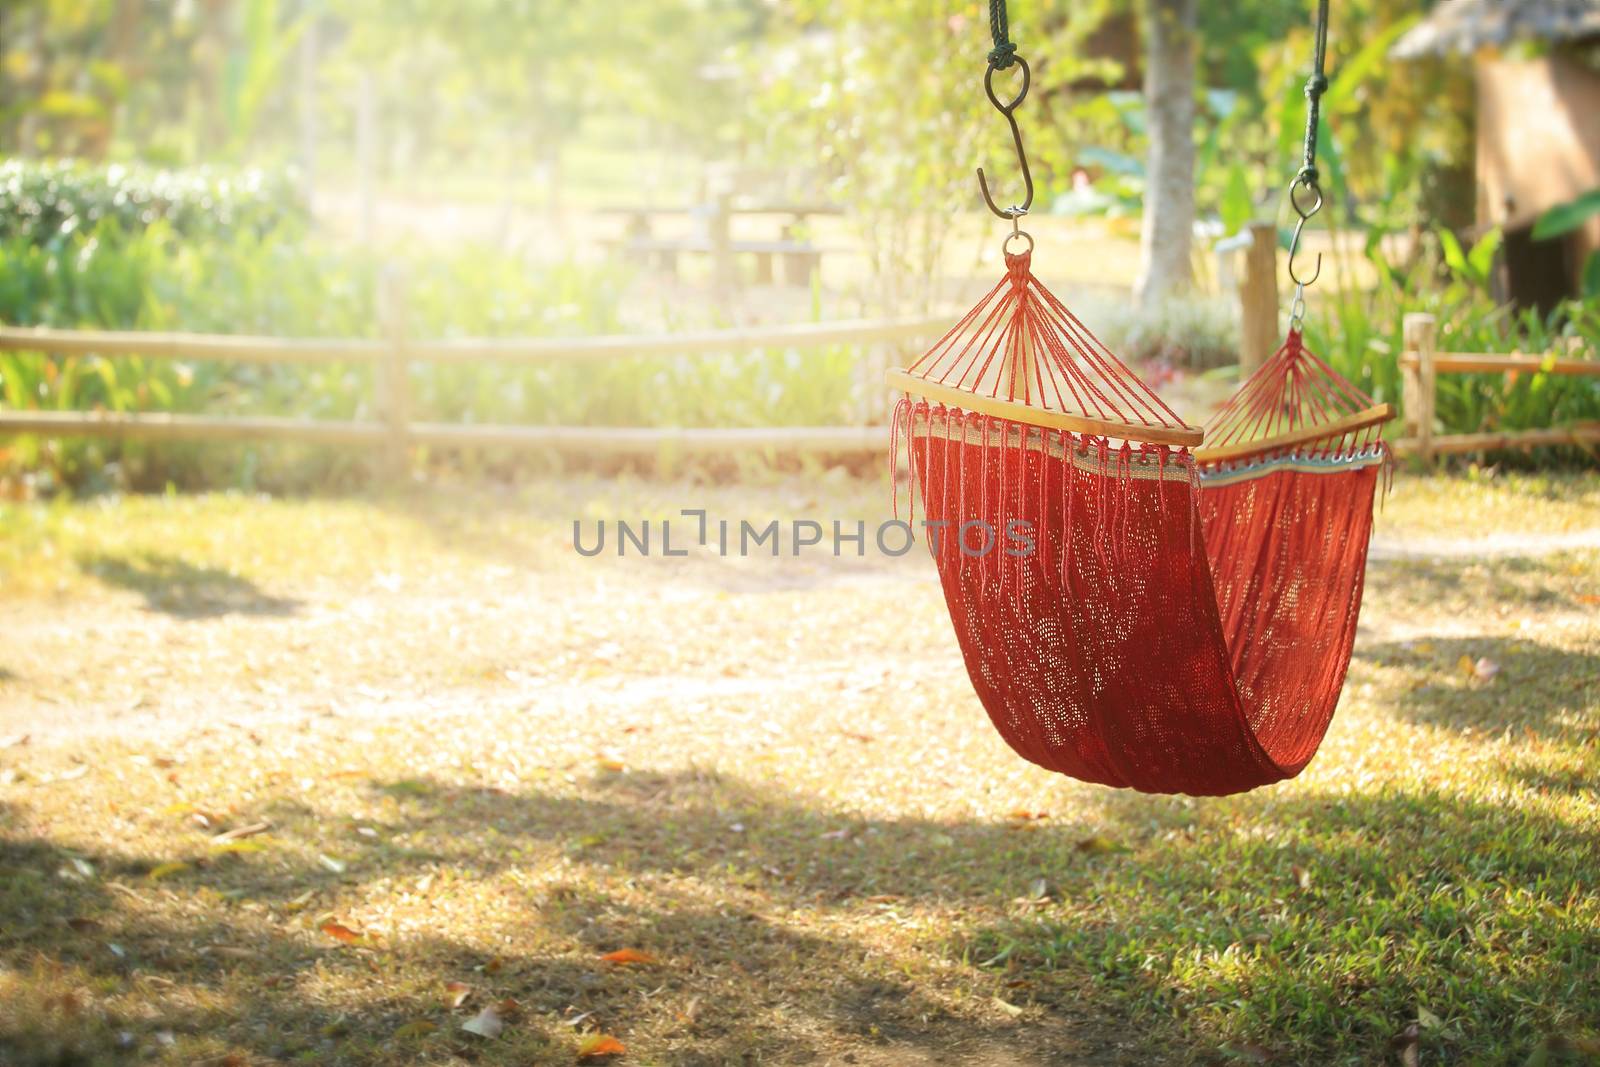 Lazy time with hammock in the summer garden. by Chokchai